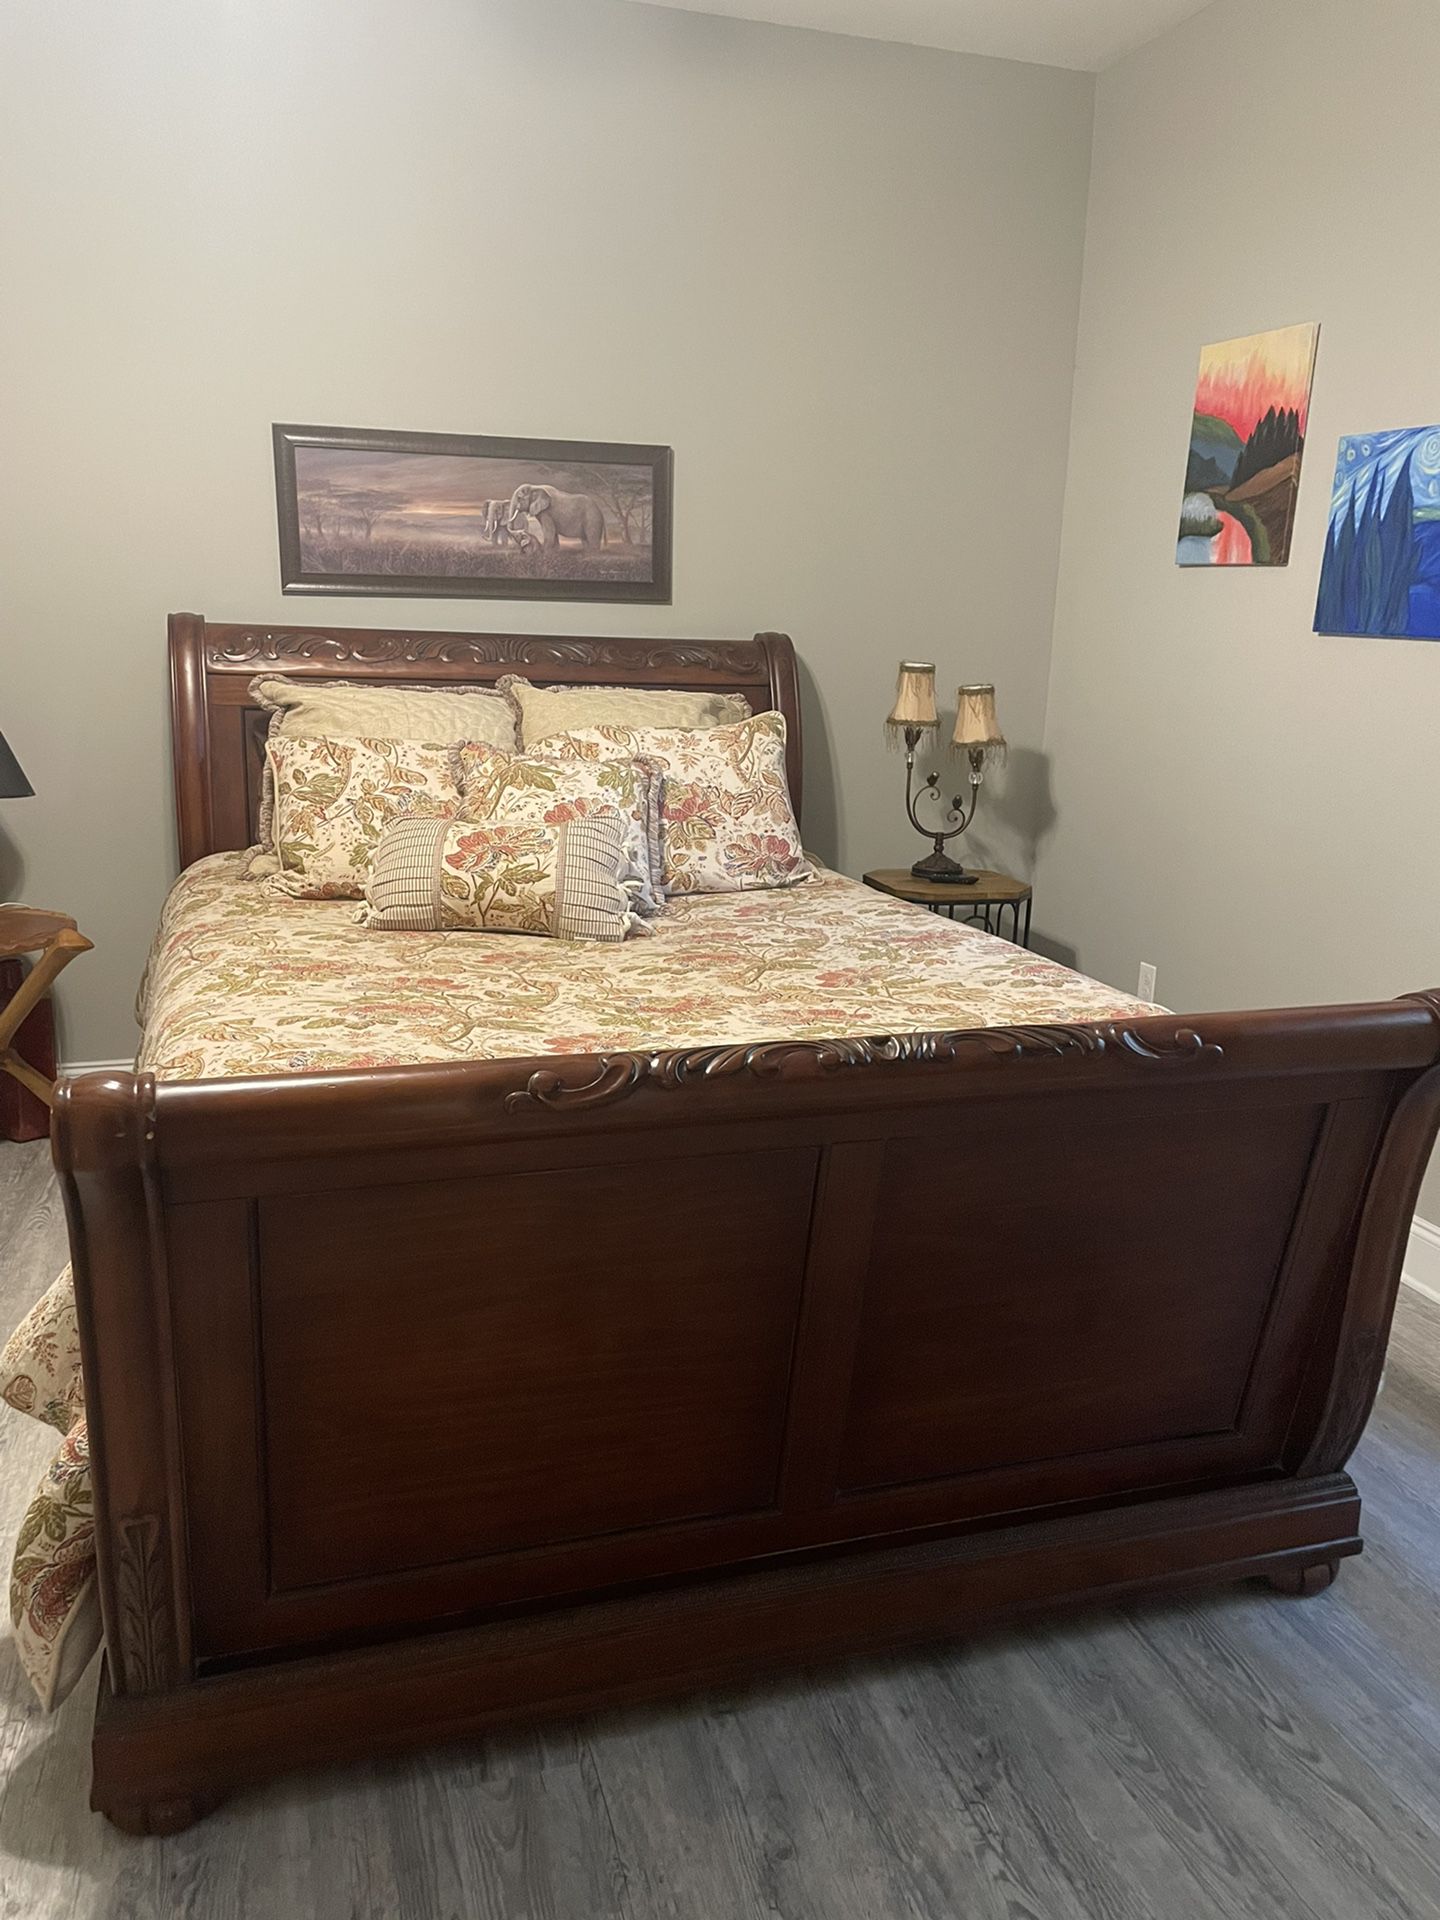 Natural Cherry Wood Sleigh Bed and Dresser